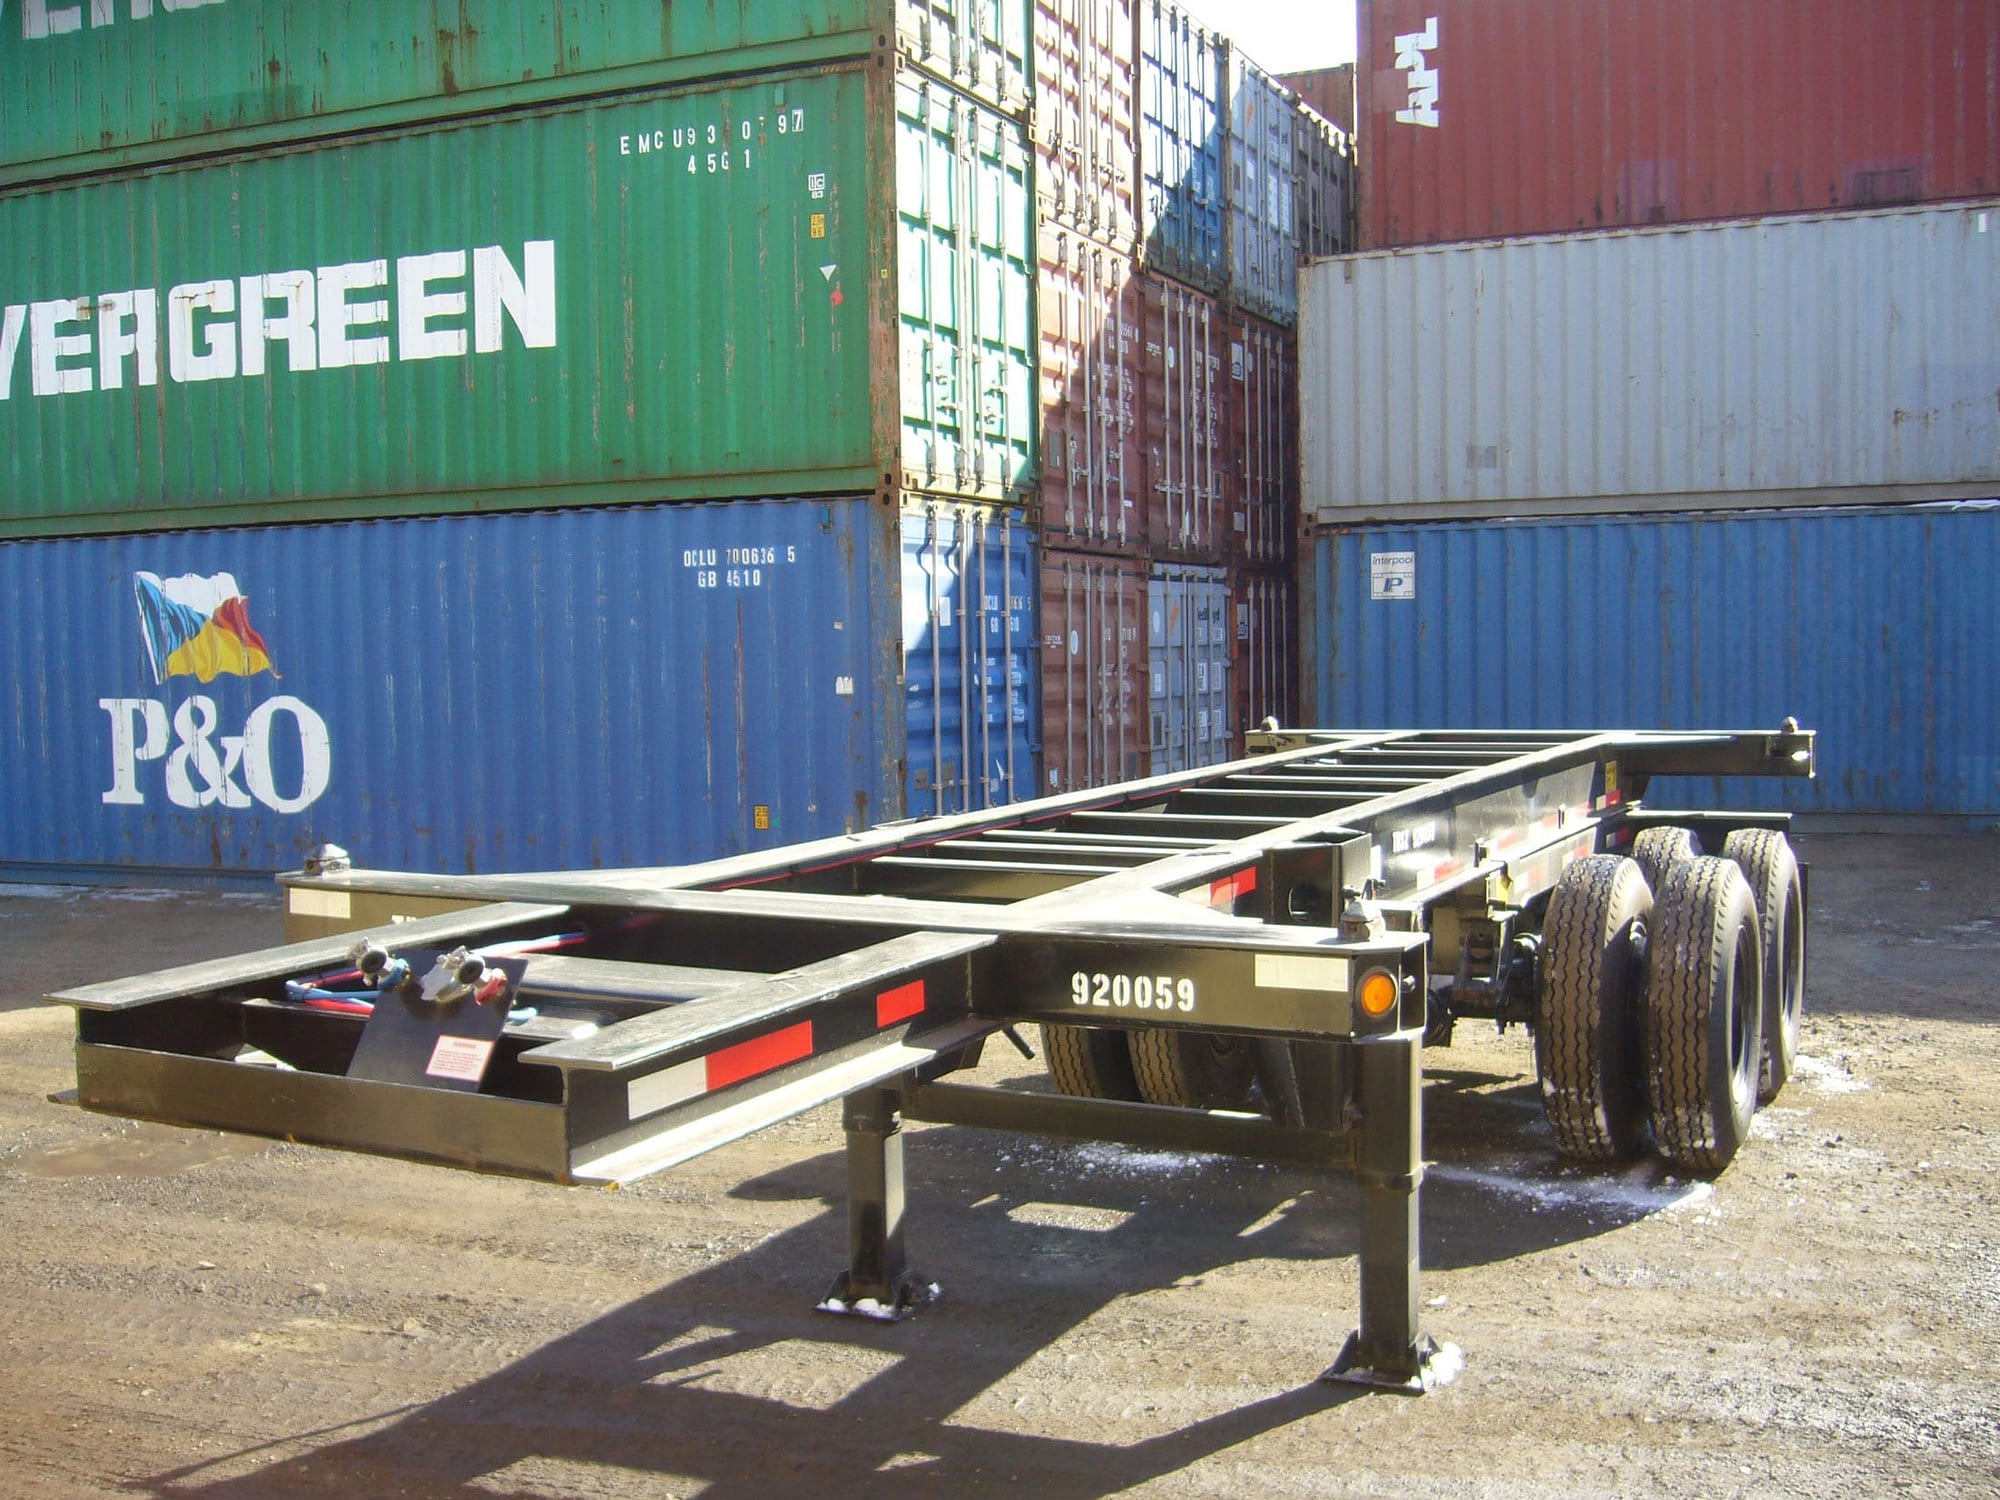 TRS sells rents modifies repairs ISO intermodal chassis: 20 foot, 40 foot, 45 foot long extendables